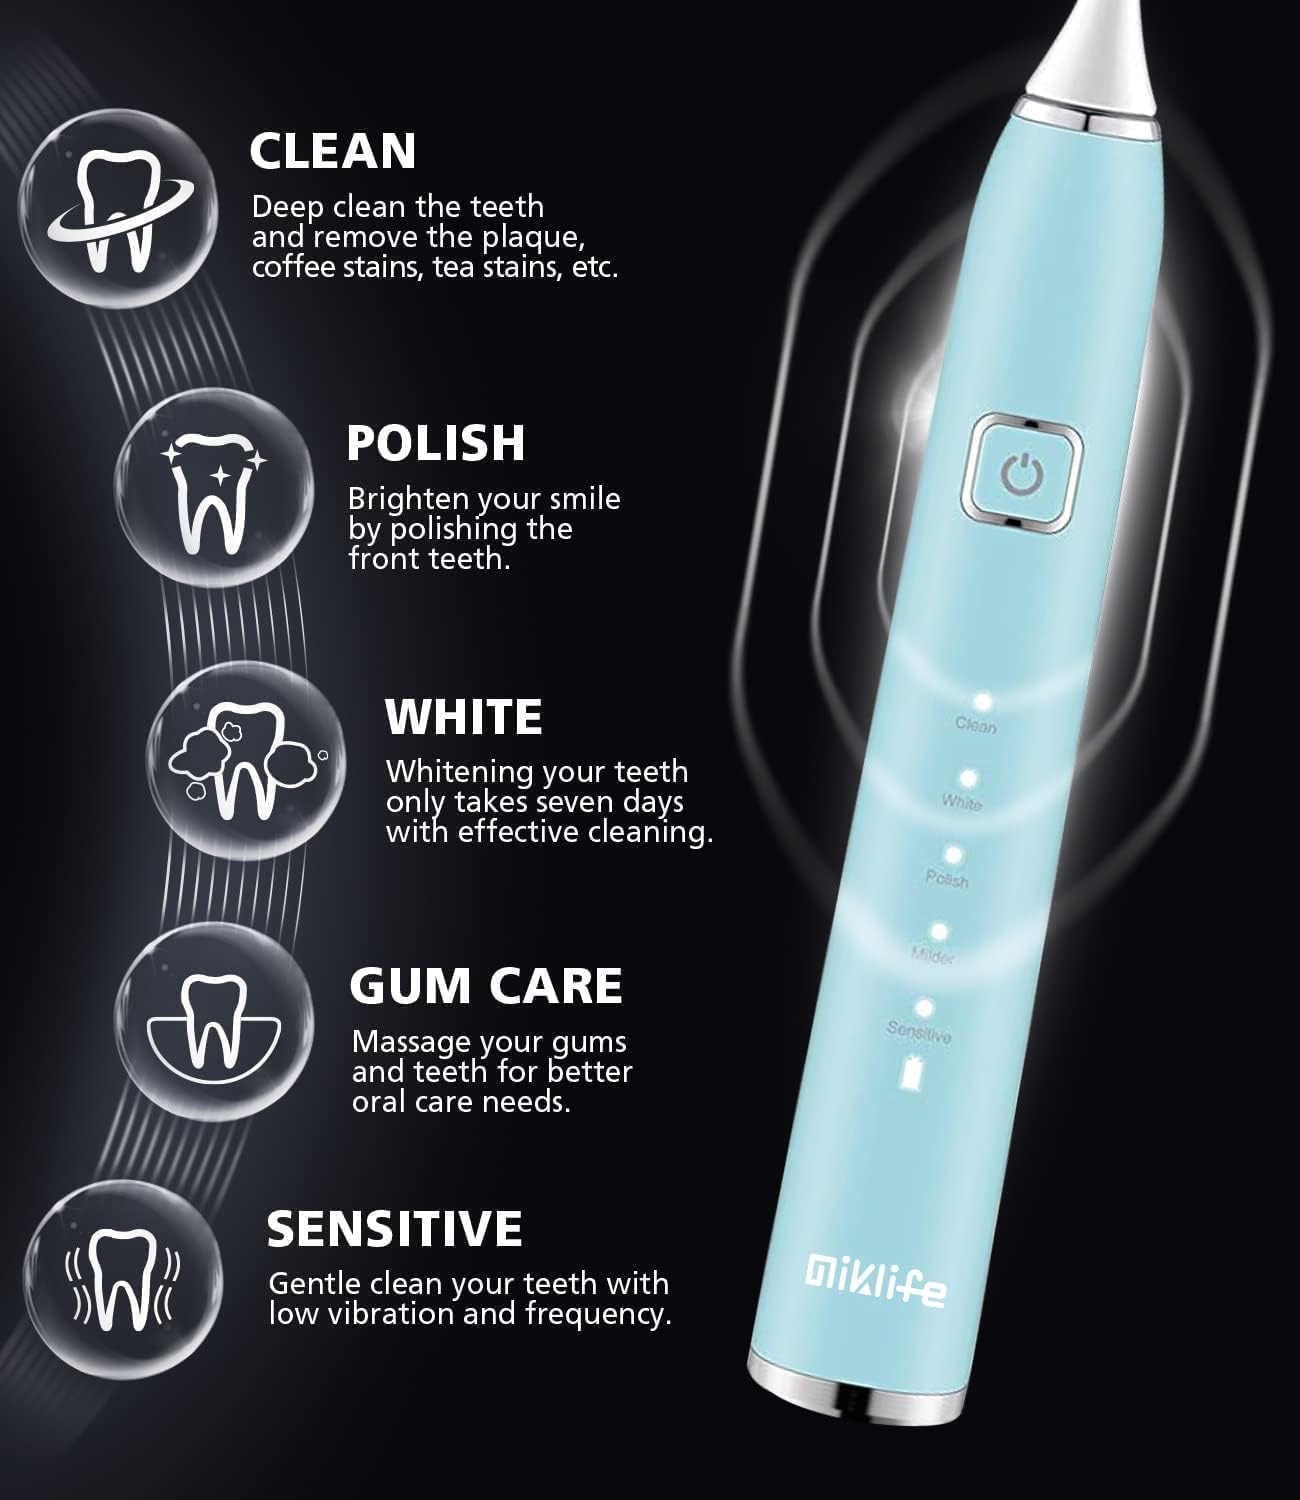 MIKLIFE Sonic Electric Toothbrush 5 Modes Rechargeable Power Smart Toothbrush Cleaner With 3 Brush Heads For Adults Black